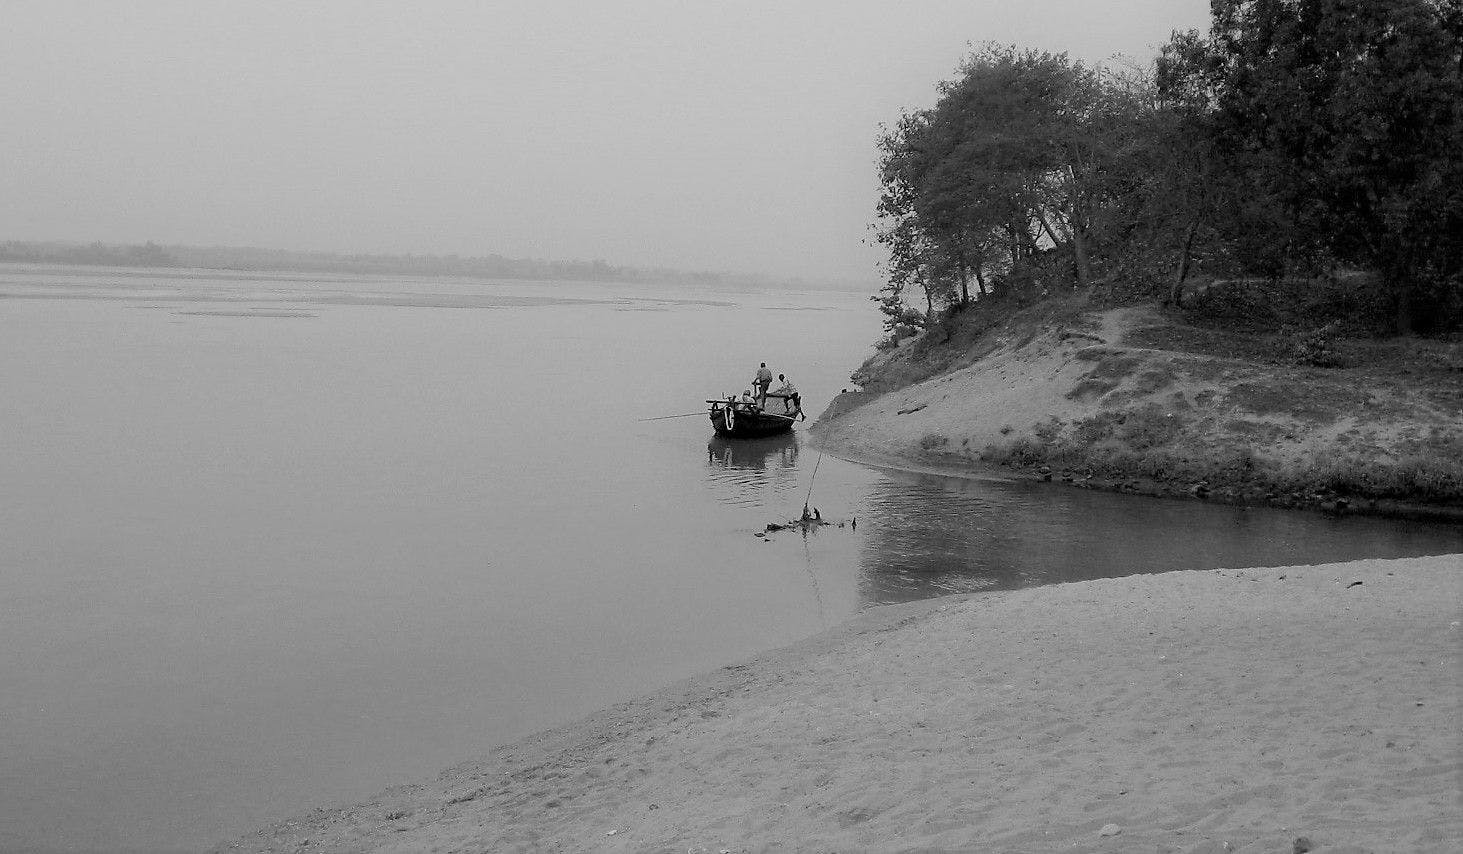 Damodar River, where the duo was spotted